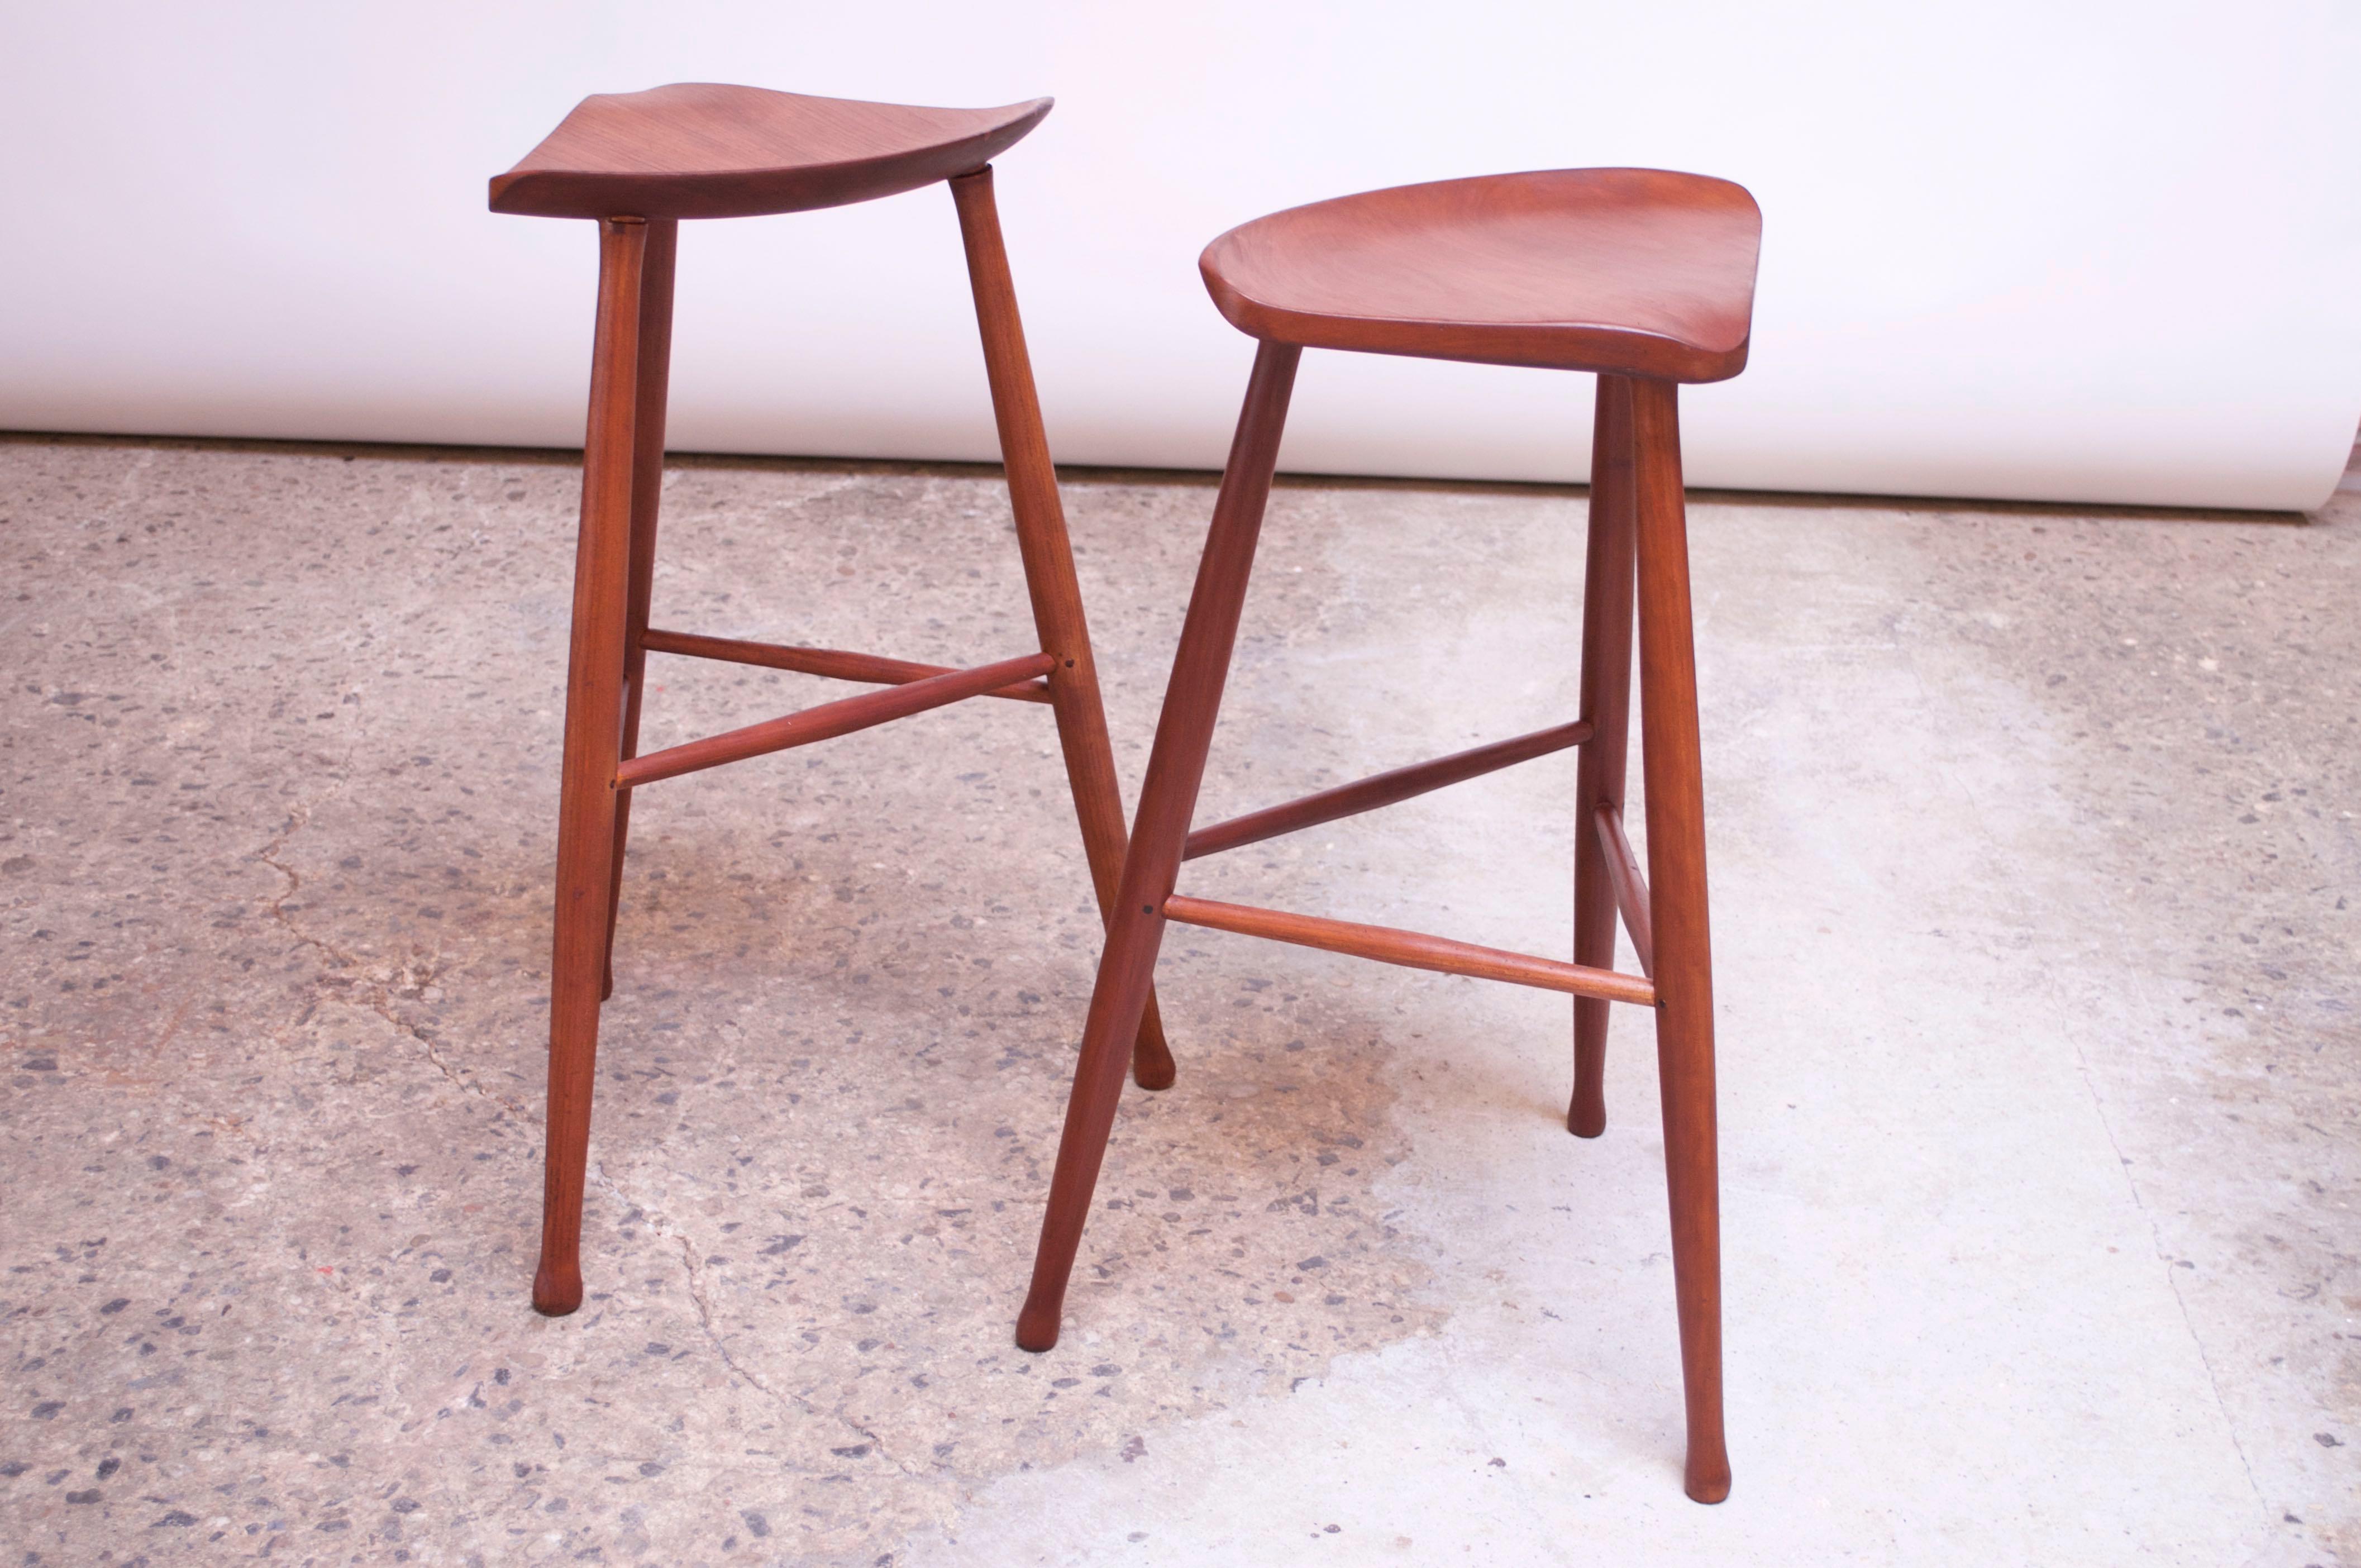 Pair of New Hope-Style walnut bar stools manufactured by David Scott in 1982. While Scott remains a noted name in woodworking today, these early, scarce examples are uniquely stylish in their minimal, modernist form, while retaining their practical,